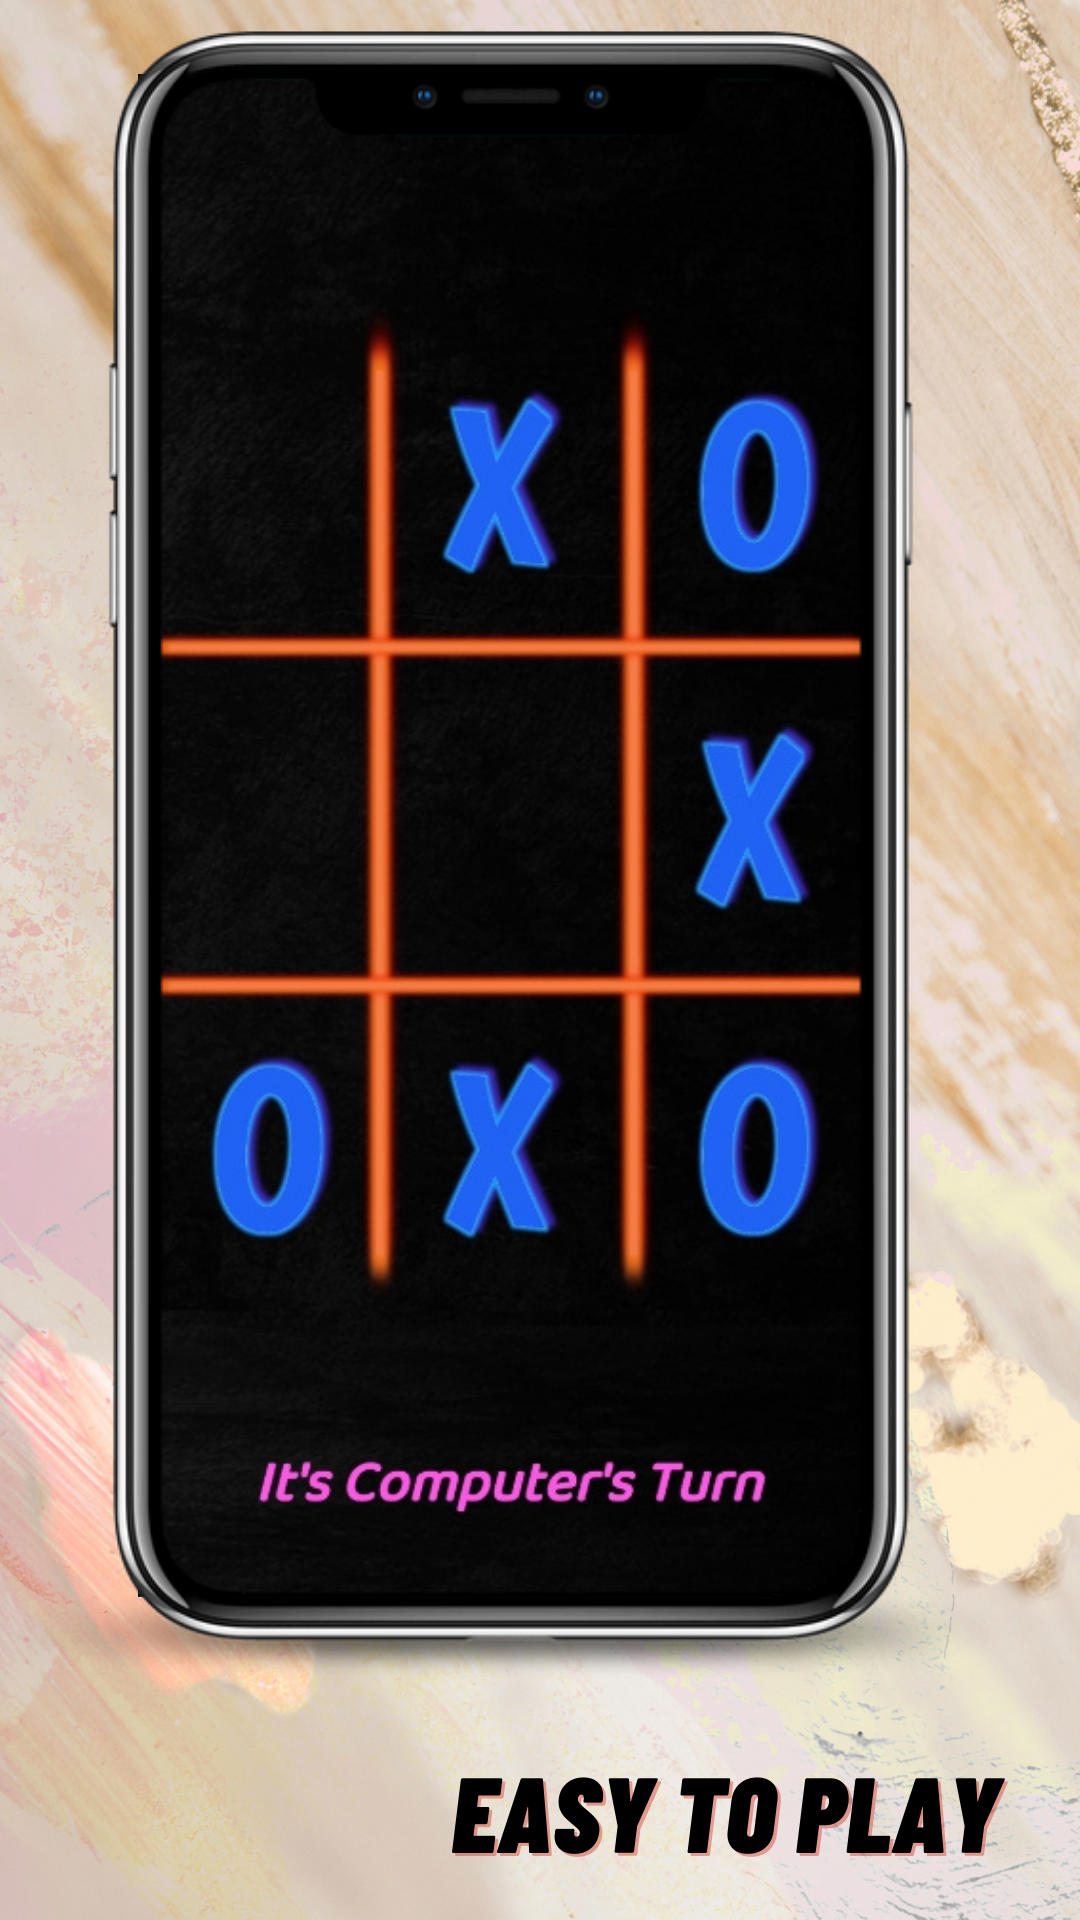 Tic tac toe multiplayer game APK for Android - Download